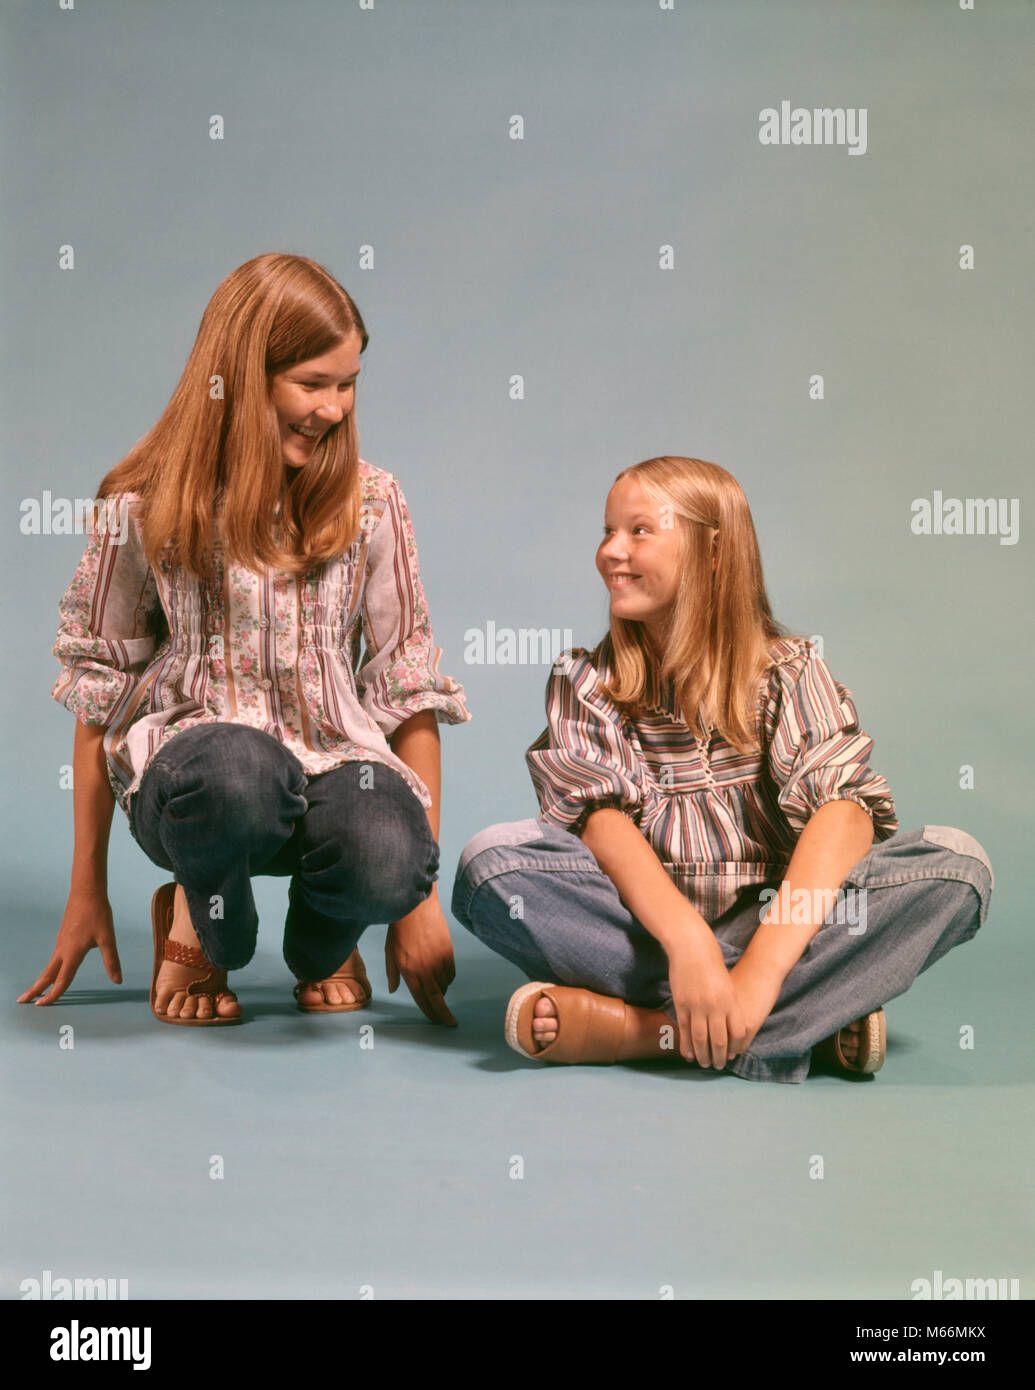 1970s TWO TEEN GIRLS SISTERS WEARING BLUE JEANS DENIM PEASANT SHIRTS SITTING AND KNEELING SMILING LOOKING AT EACH OTHER - kj6514 HAR001 HARS STUDIO SHOT HEALTHINESS HOME LIFE COPY SPACE PEOPLE CHILDREN FRIENDSHIP HALF-LENGTH ADOLESCENT TEENAGE GIRL INDOORS SIBLINGS DENIM SISTERS NOSTALGIA TOGETHERNESS 13-15 YEARS 16-17 YEARS KNEELING HAPPINESS LEISURE STYLES AND SHIRTS SIBLING SMILES JOYFUL FASHIONS LONG HAIR TEENAGED BLUE JEANS JUVENILES PEASANT SANDALS CAUCASIAN ETHNICITY EACH OTHER OLD FASHIONED PERSONS Stock Photo